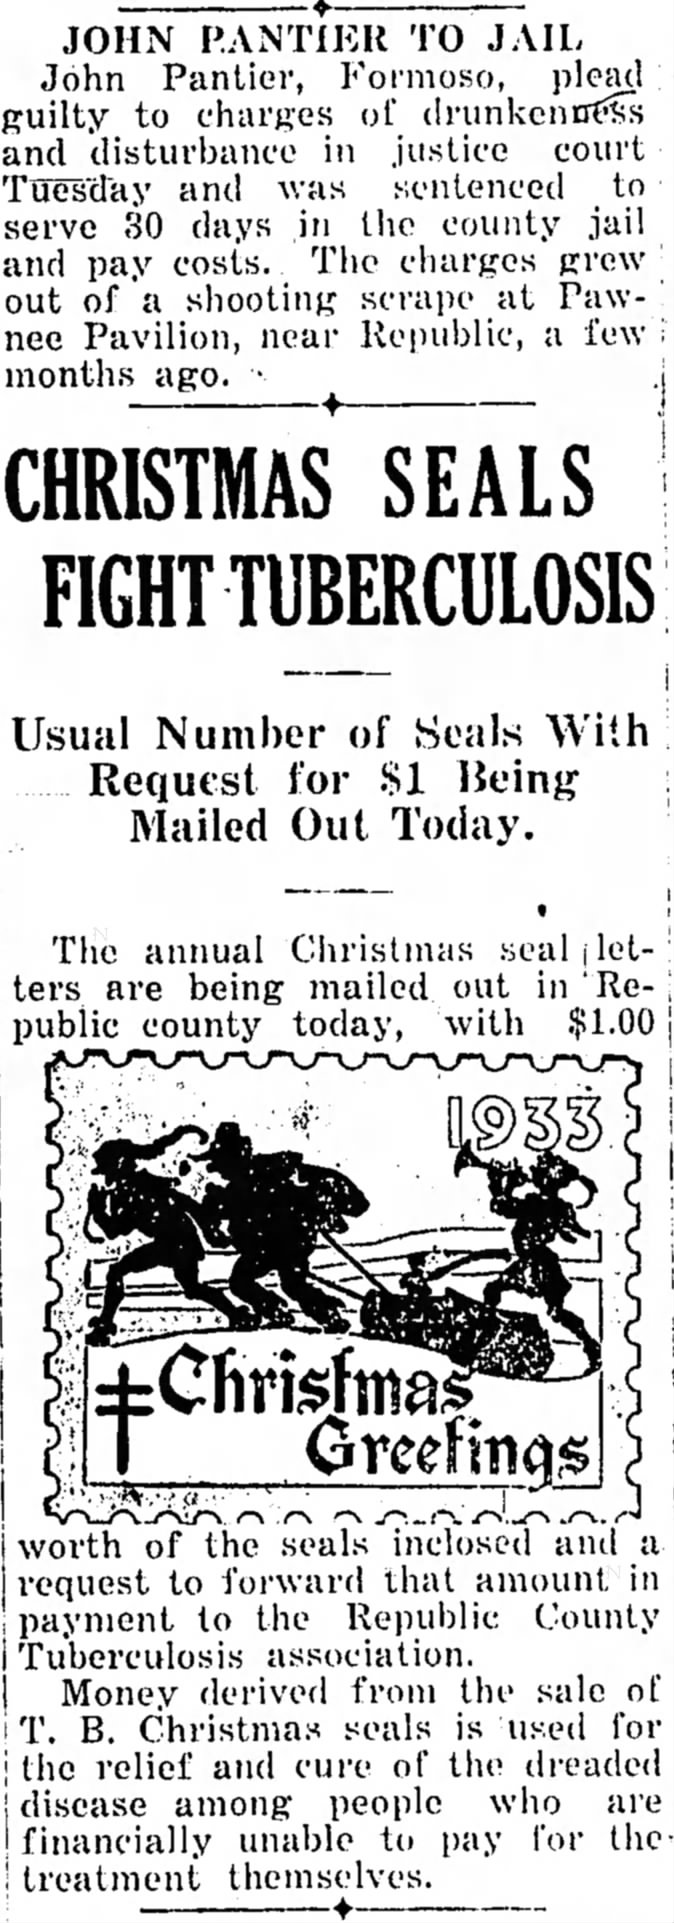 Christmas Seal Campaign
Page 1, Column 7